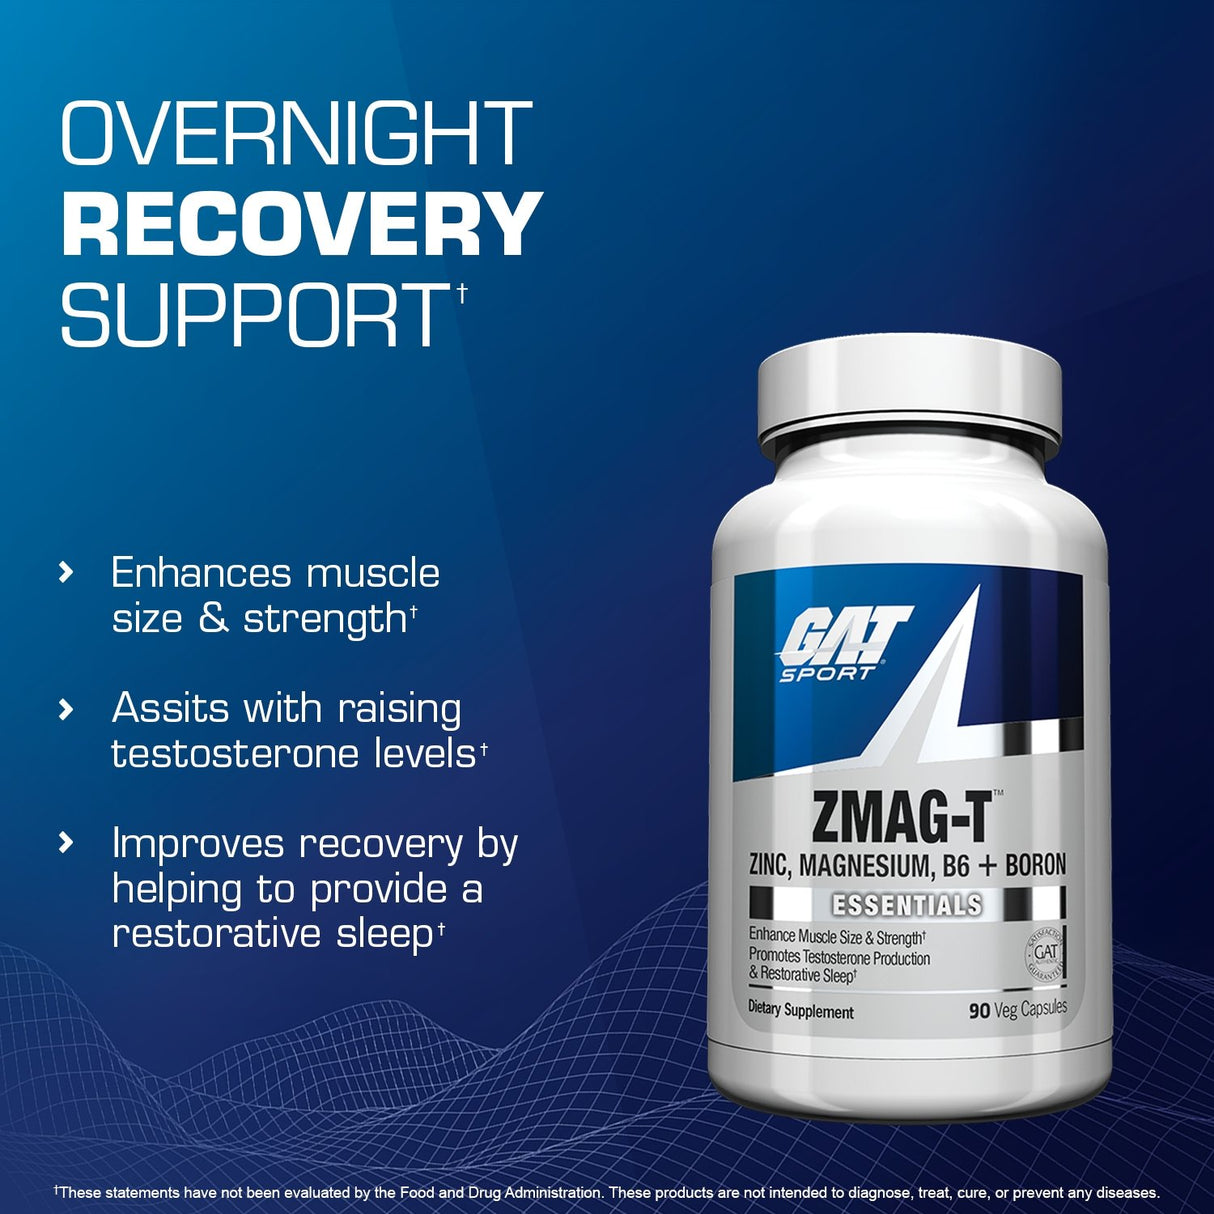 ZMAG-T Overnight Recovery Support - overnight recovery support